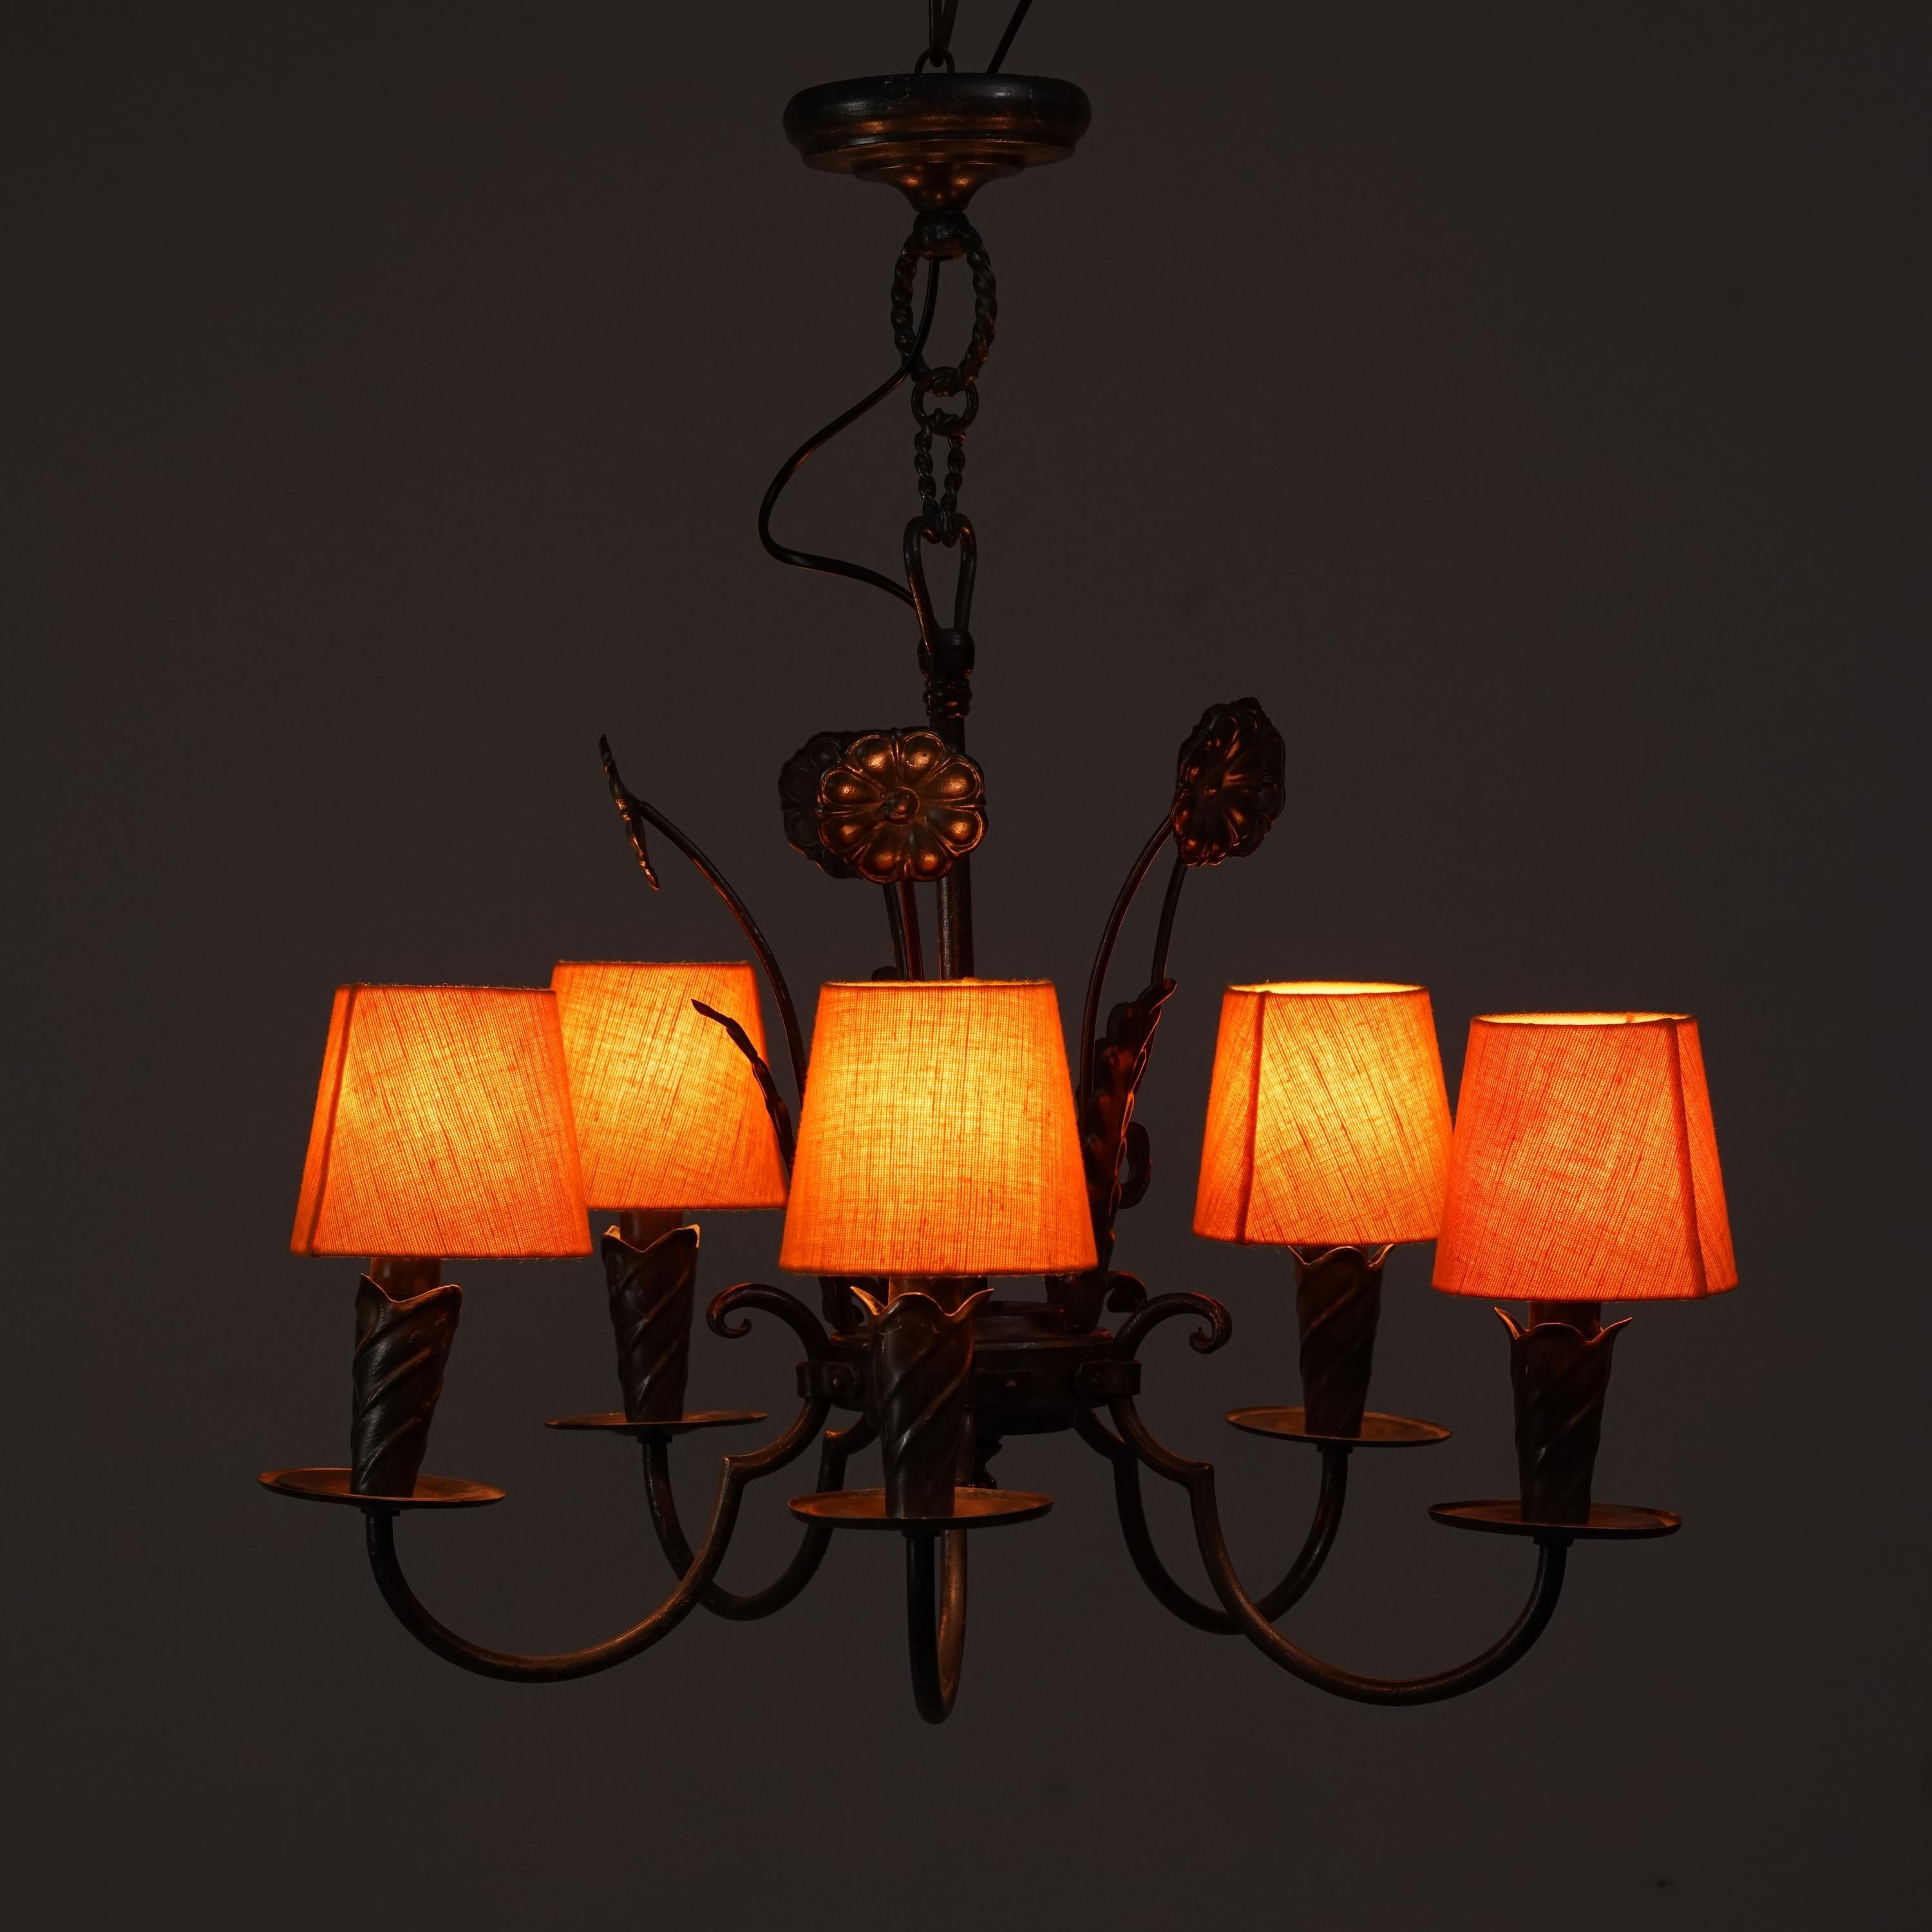 Finnish Iron Chandelier by Taidetakomo Hakkarainen / Antti Hakkarainen from the 1930s. Forged iron with fabric lampshades. Good vintage condition, minor wear consistent with age and use.